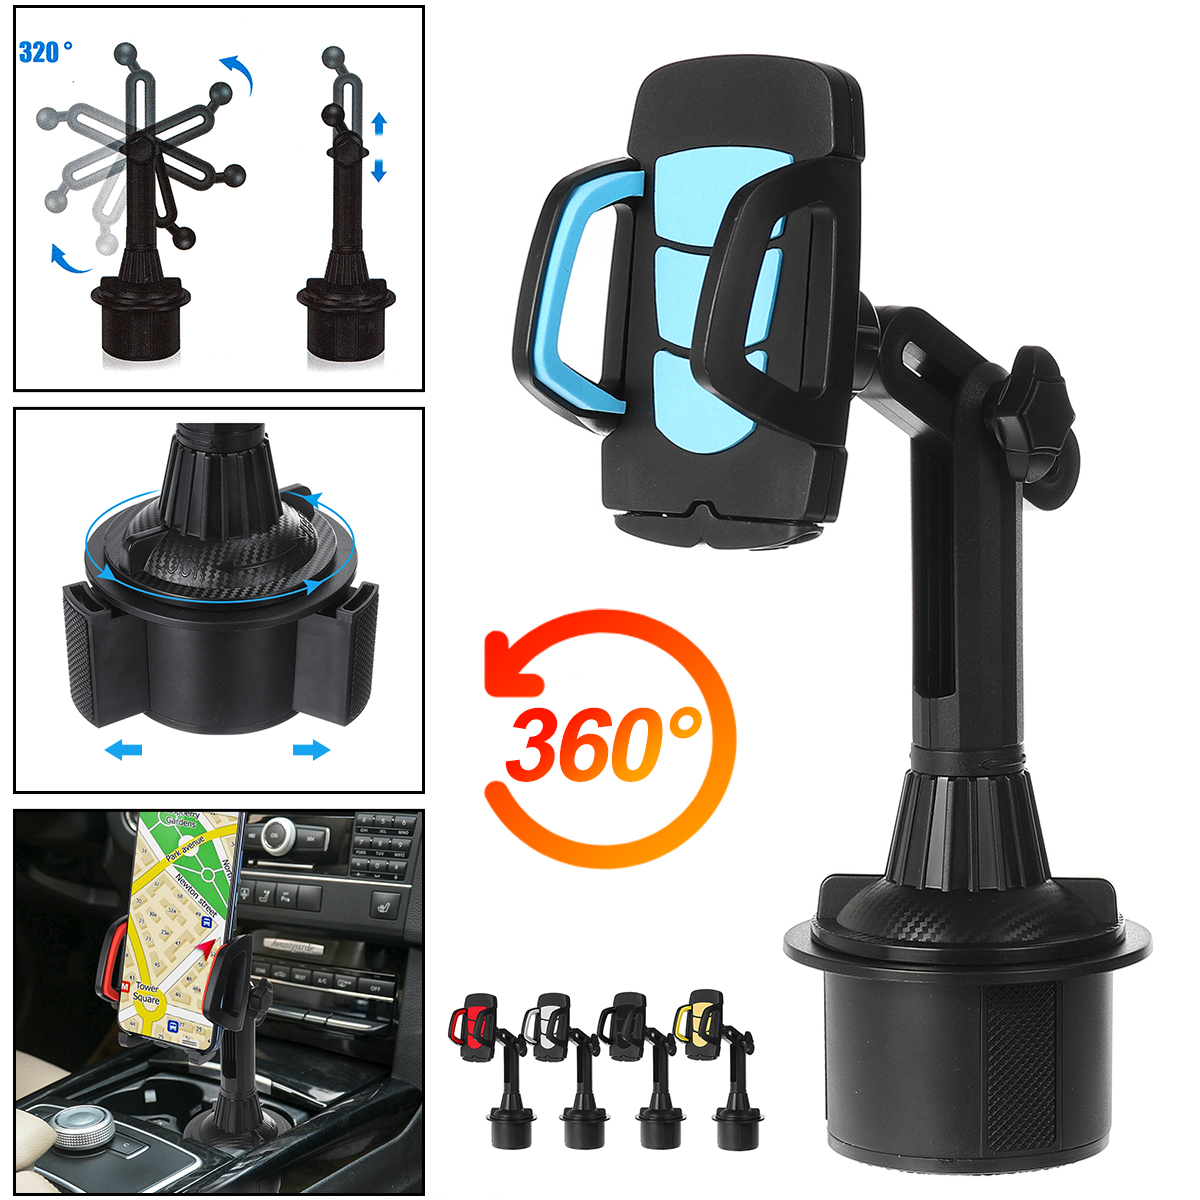 Bakeey-Car-Mount-360deg-Adjustable-Cup-Holder-Cradle-for-iPhone-12-for-Samsung-Galaxy-Note-20-ultra--1778684-3